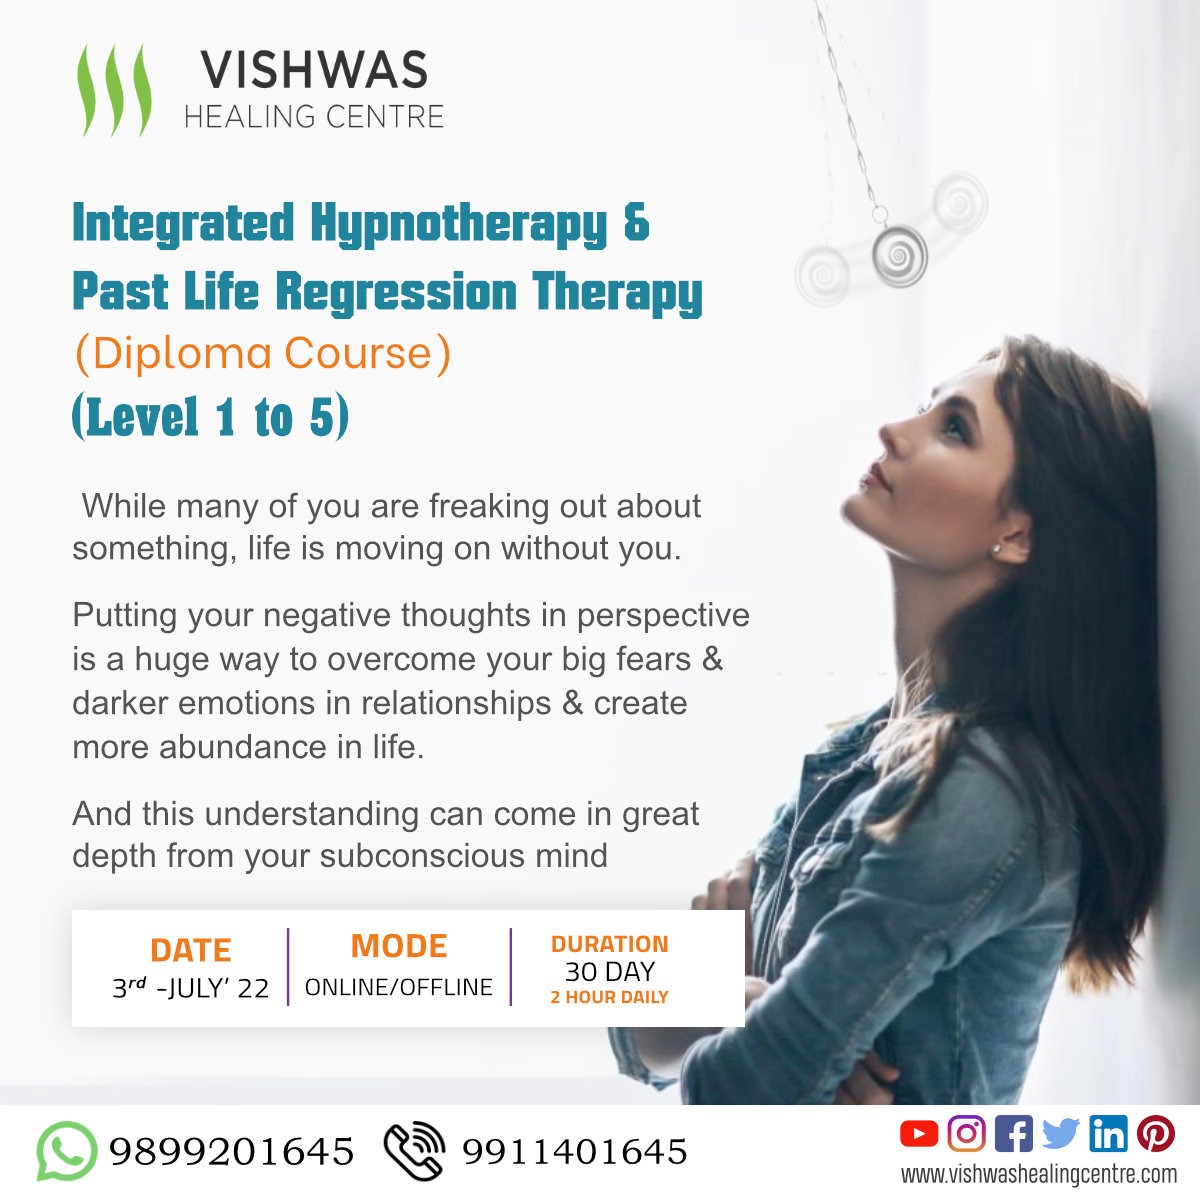 Integrated Hypnotherapy And Past Life Regression Therapy (Diploma Course), Online Event